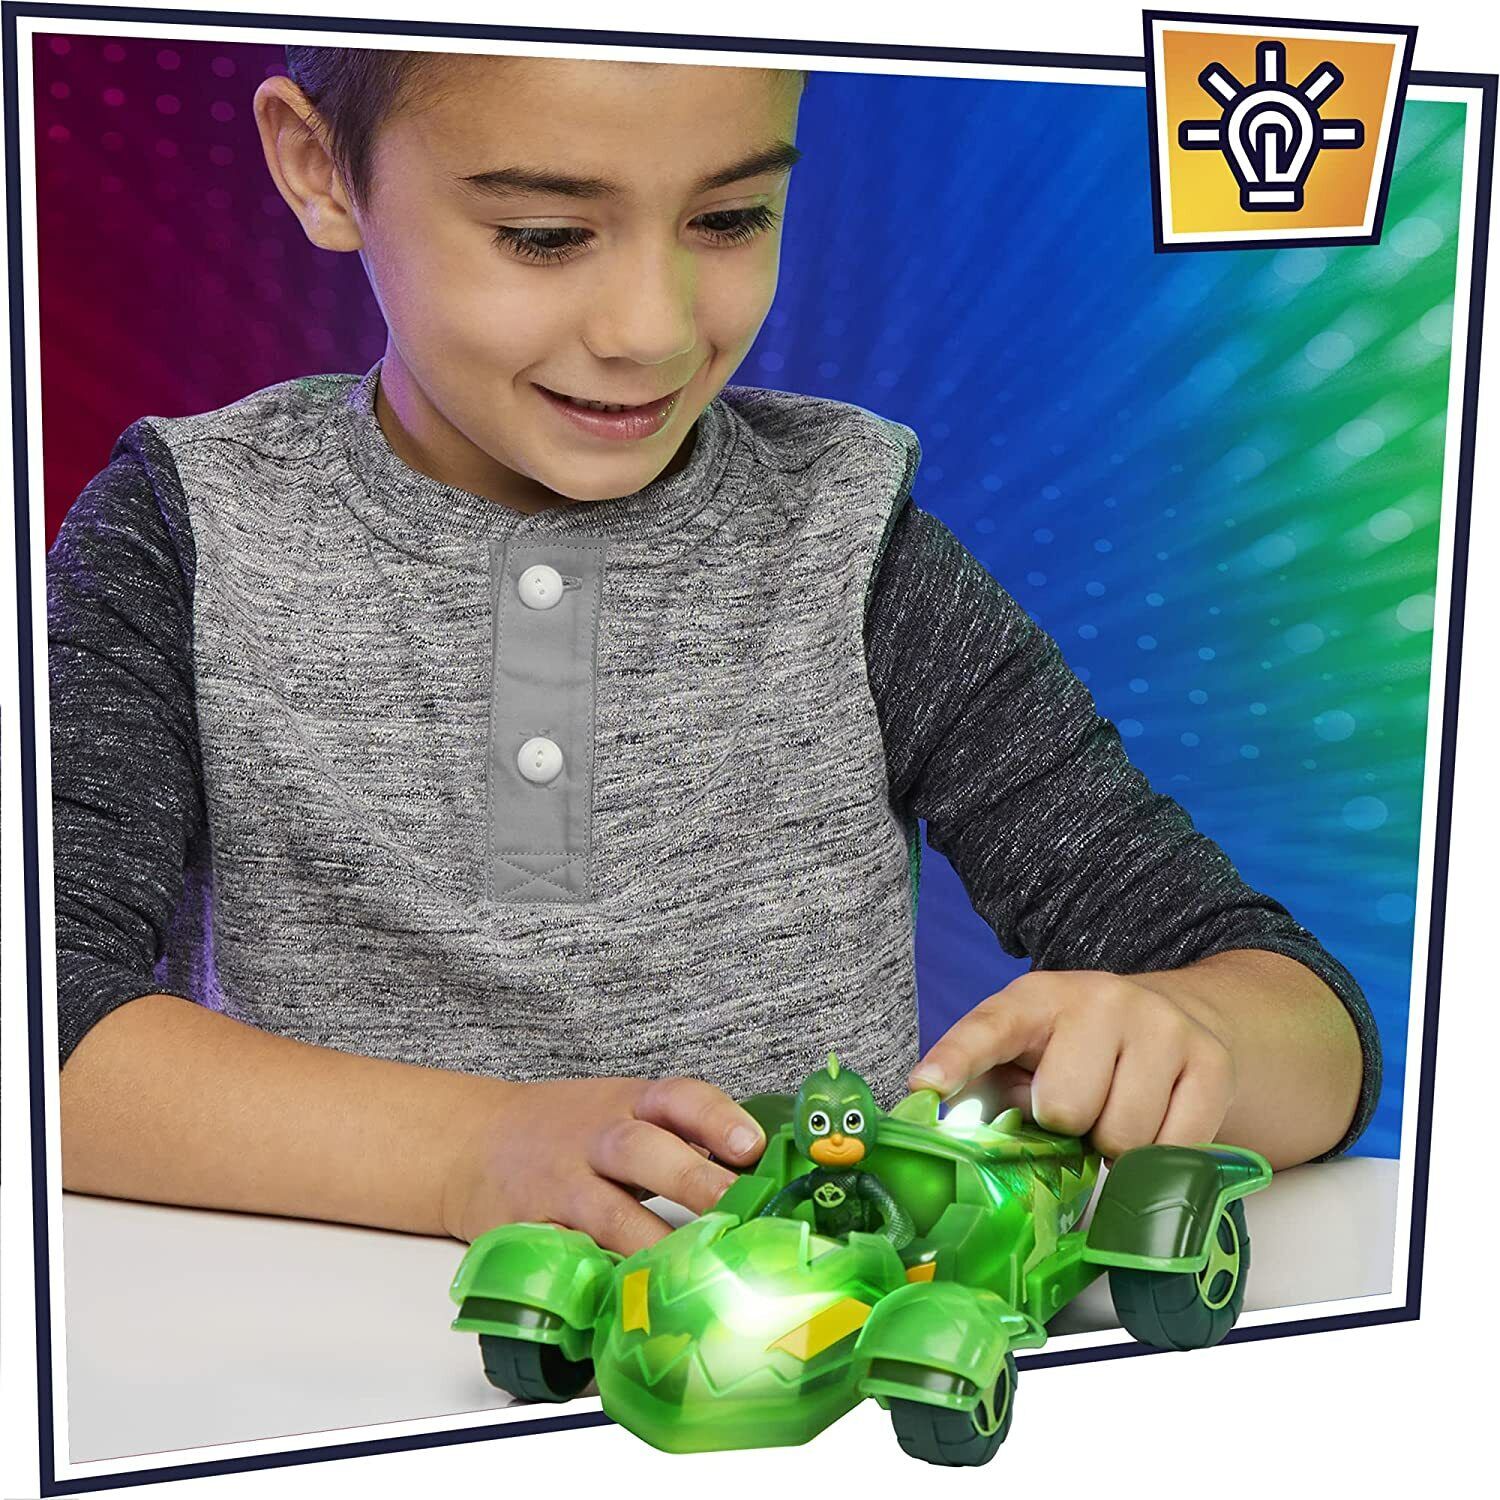 New PJ Masks Glow and Go Racer Gekko - Fast Shipping!